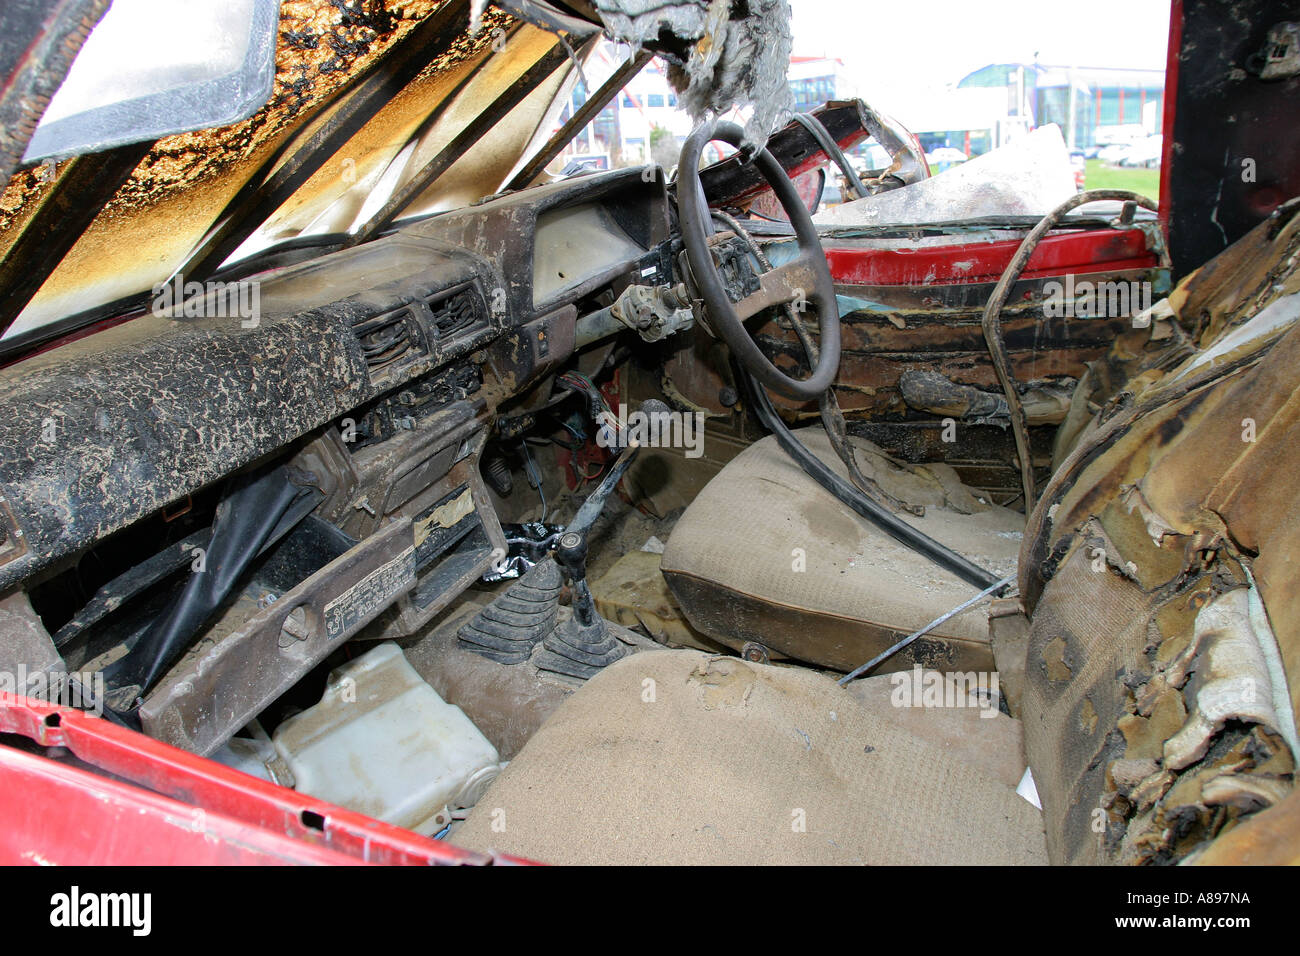 Dental fordøje analog Toyota Hilux as demolished on the BBC television program "Top Gear". UK.  Shown at the NEC Commercial Vehicle Show Stock Photo - Alamy